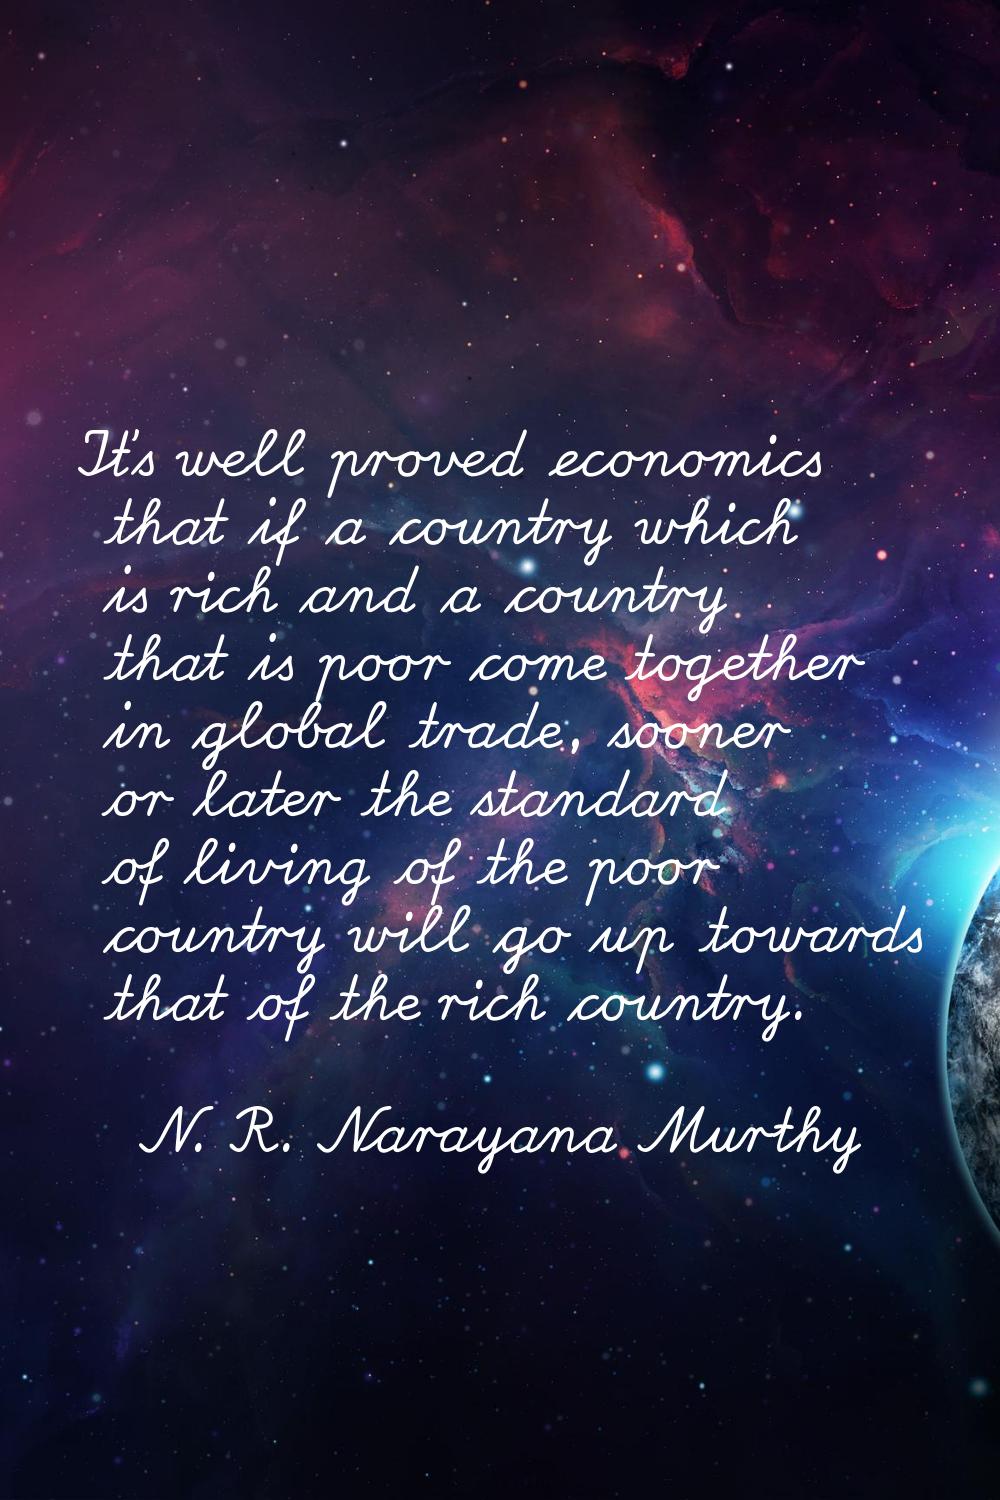 It's well proved economics that if a country which is rich and a country that is poor come together